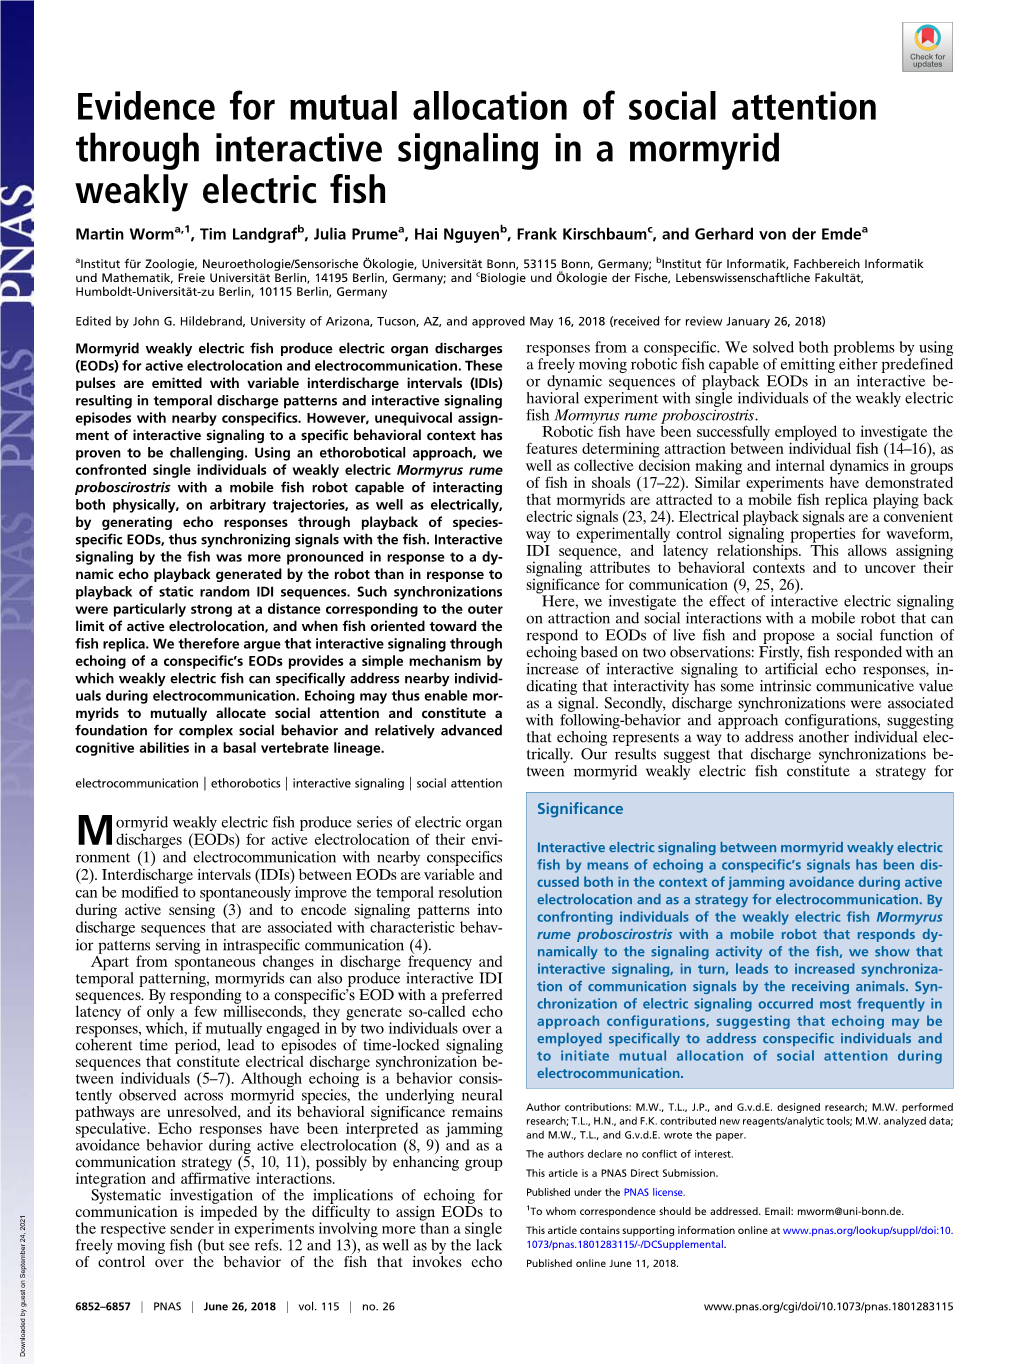 Evidence for Mutual Allocation of Social Attention Through Interactive Signaling in a Mormyrid Weakly Electric Fish